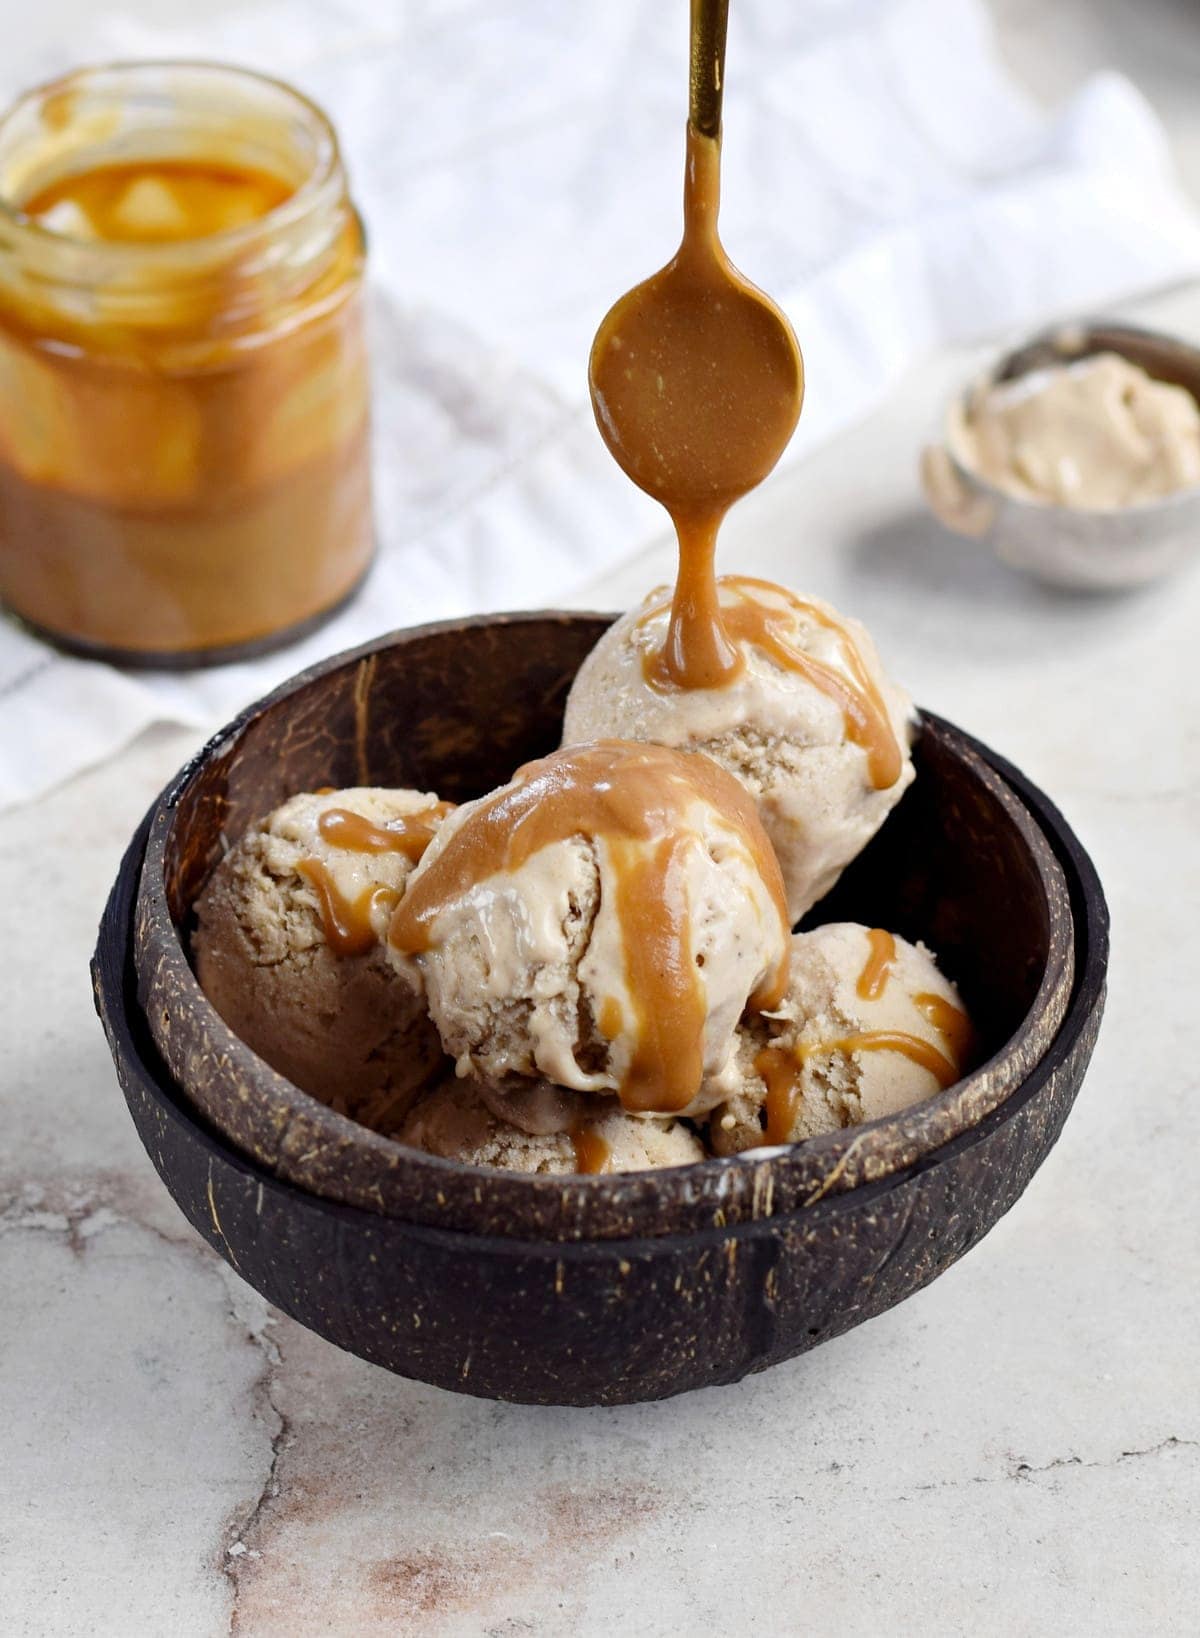 scoops of peanut butter banana ice cream in bowl with caramel sauce drizzle